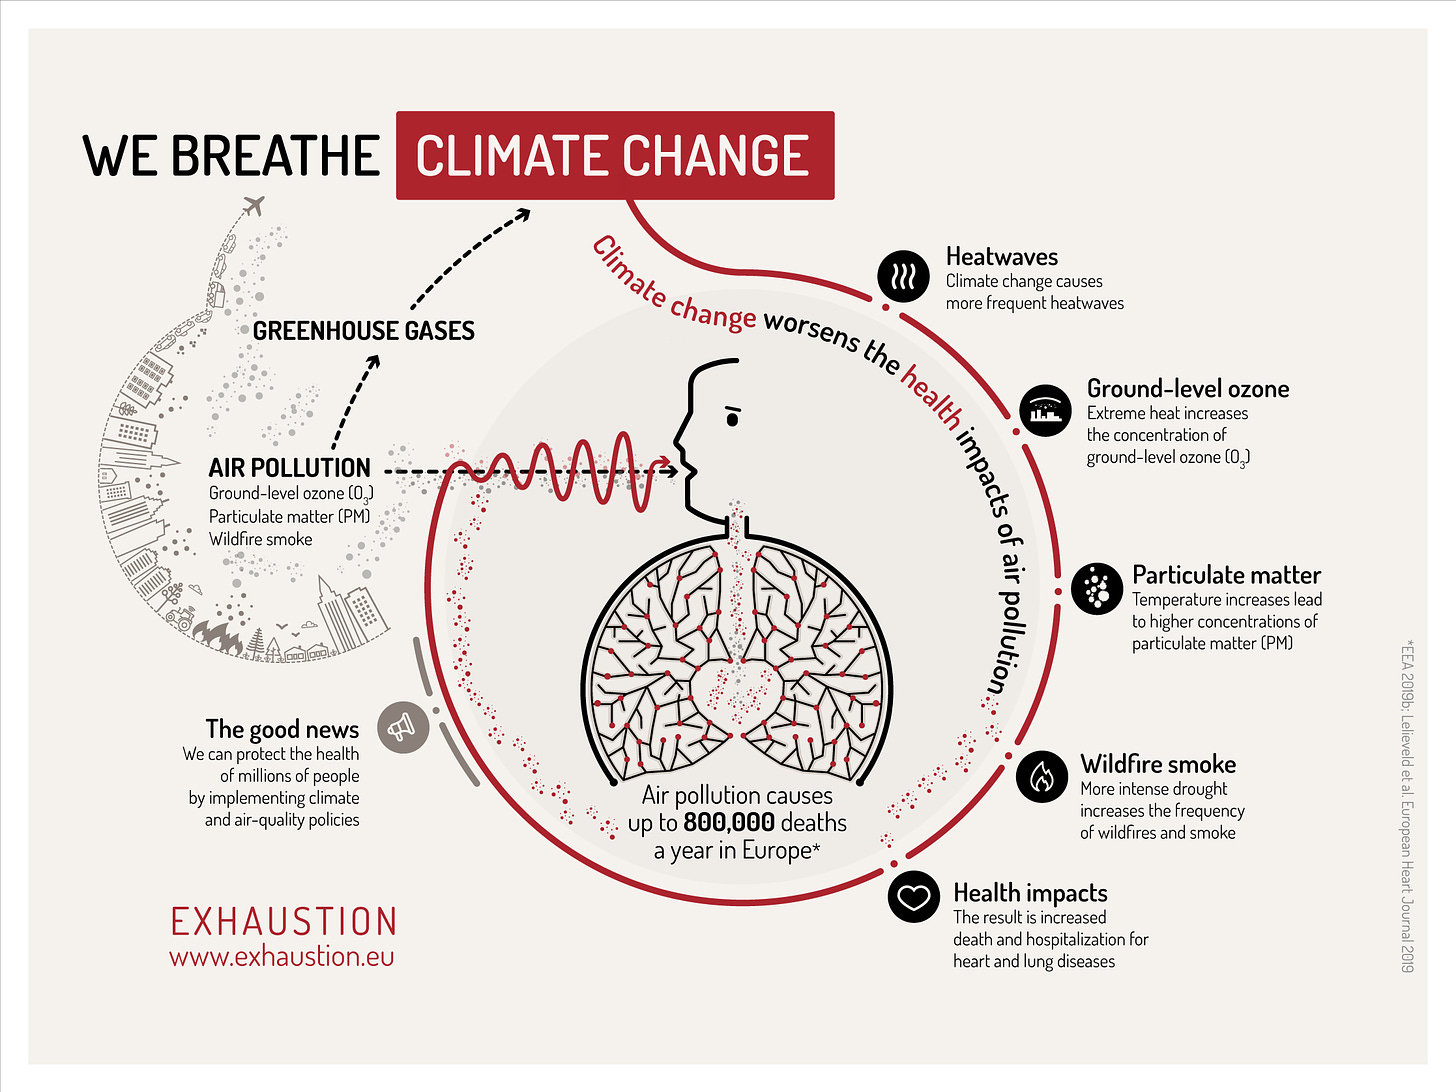 We breathe climate change. Climate change worsens the health impacts of air pollution. Factors that impact heart and lung health include heatwaves, ground-level ozone, particulate matter and wildfire smoke.